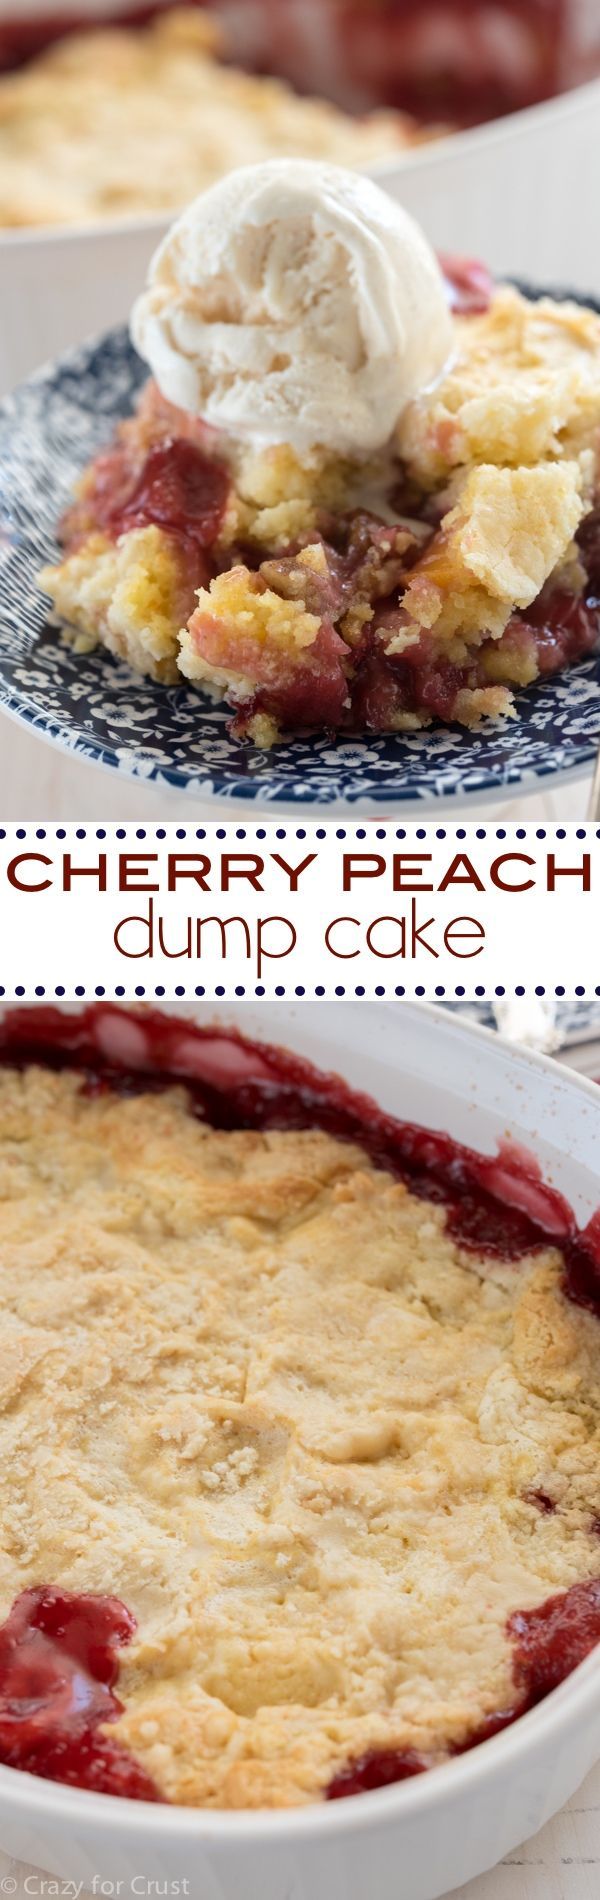 This Cherry Peach Dump Cake is the perfect easy and fast potluck recipe! It’s simple and cheap to make wit